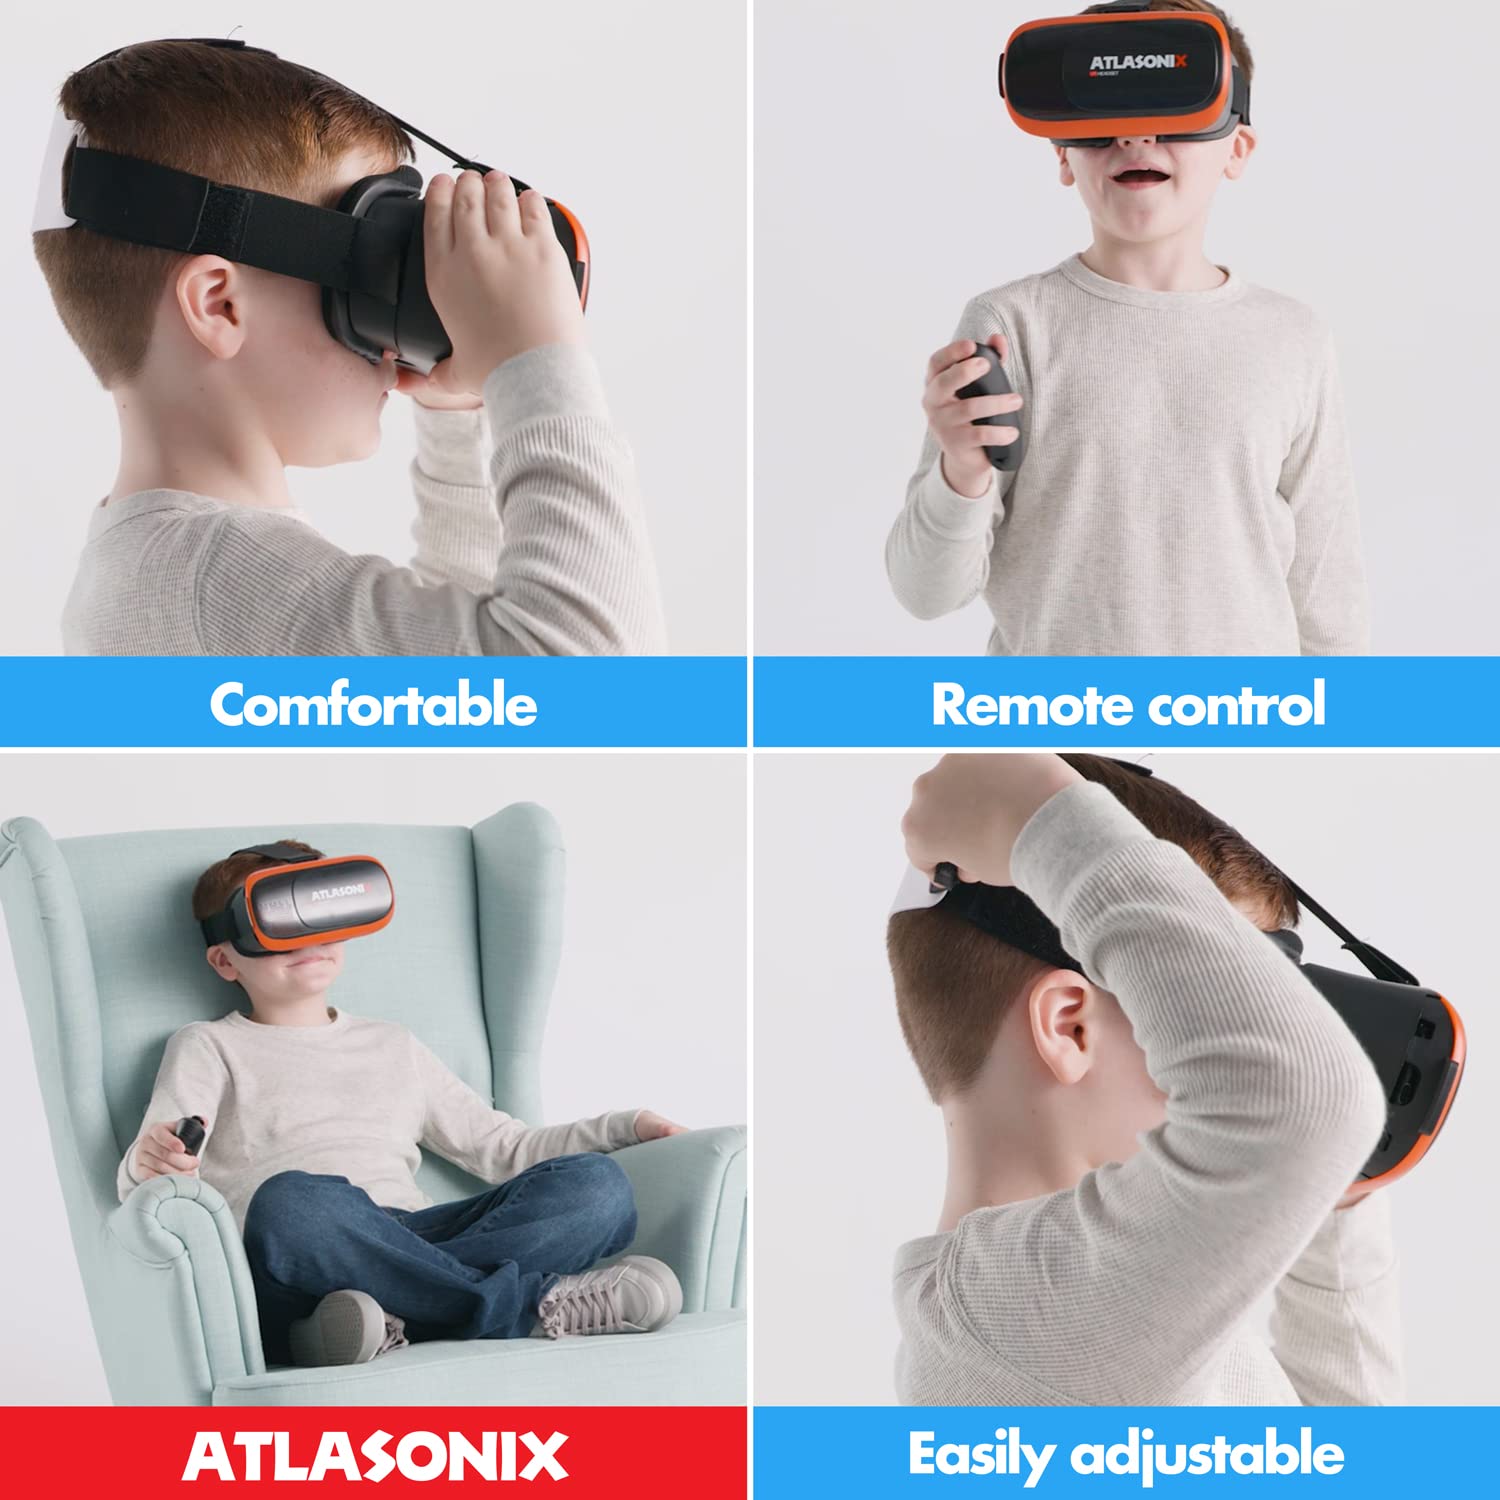 Atlasonix VR Headset Compatible with iPhone and Android Phones Bonus: Remote Control for Android Smartphones 3D Virtual Reality Goggles with Controller Adjustable VR Glasses for Kids and Adults